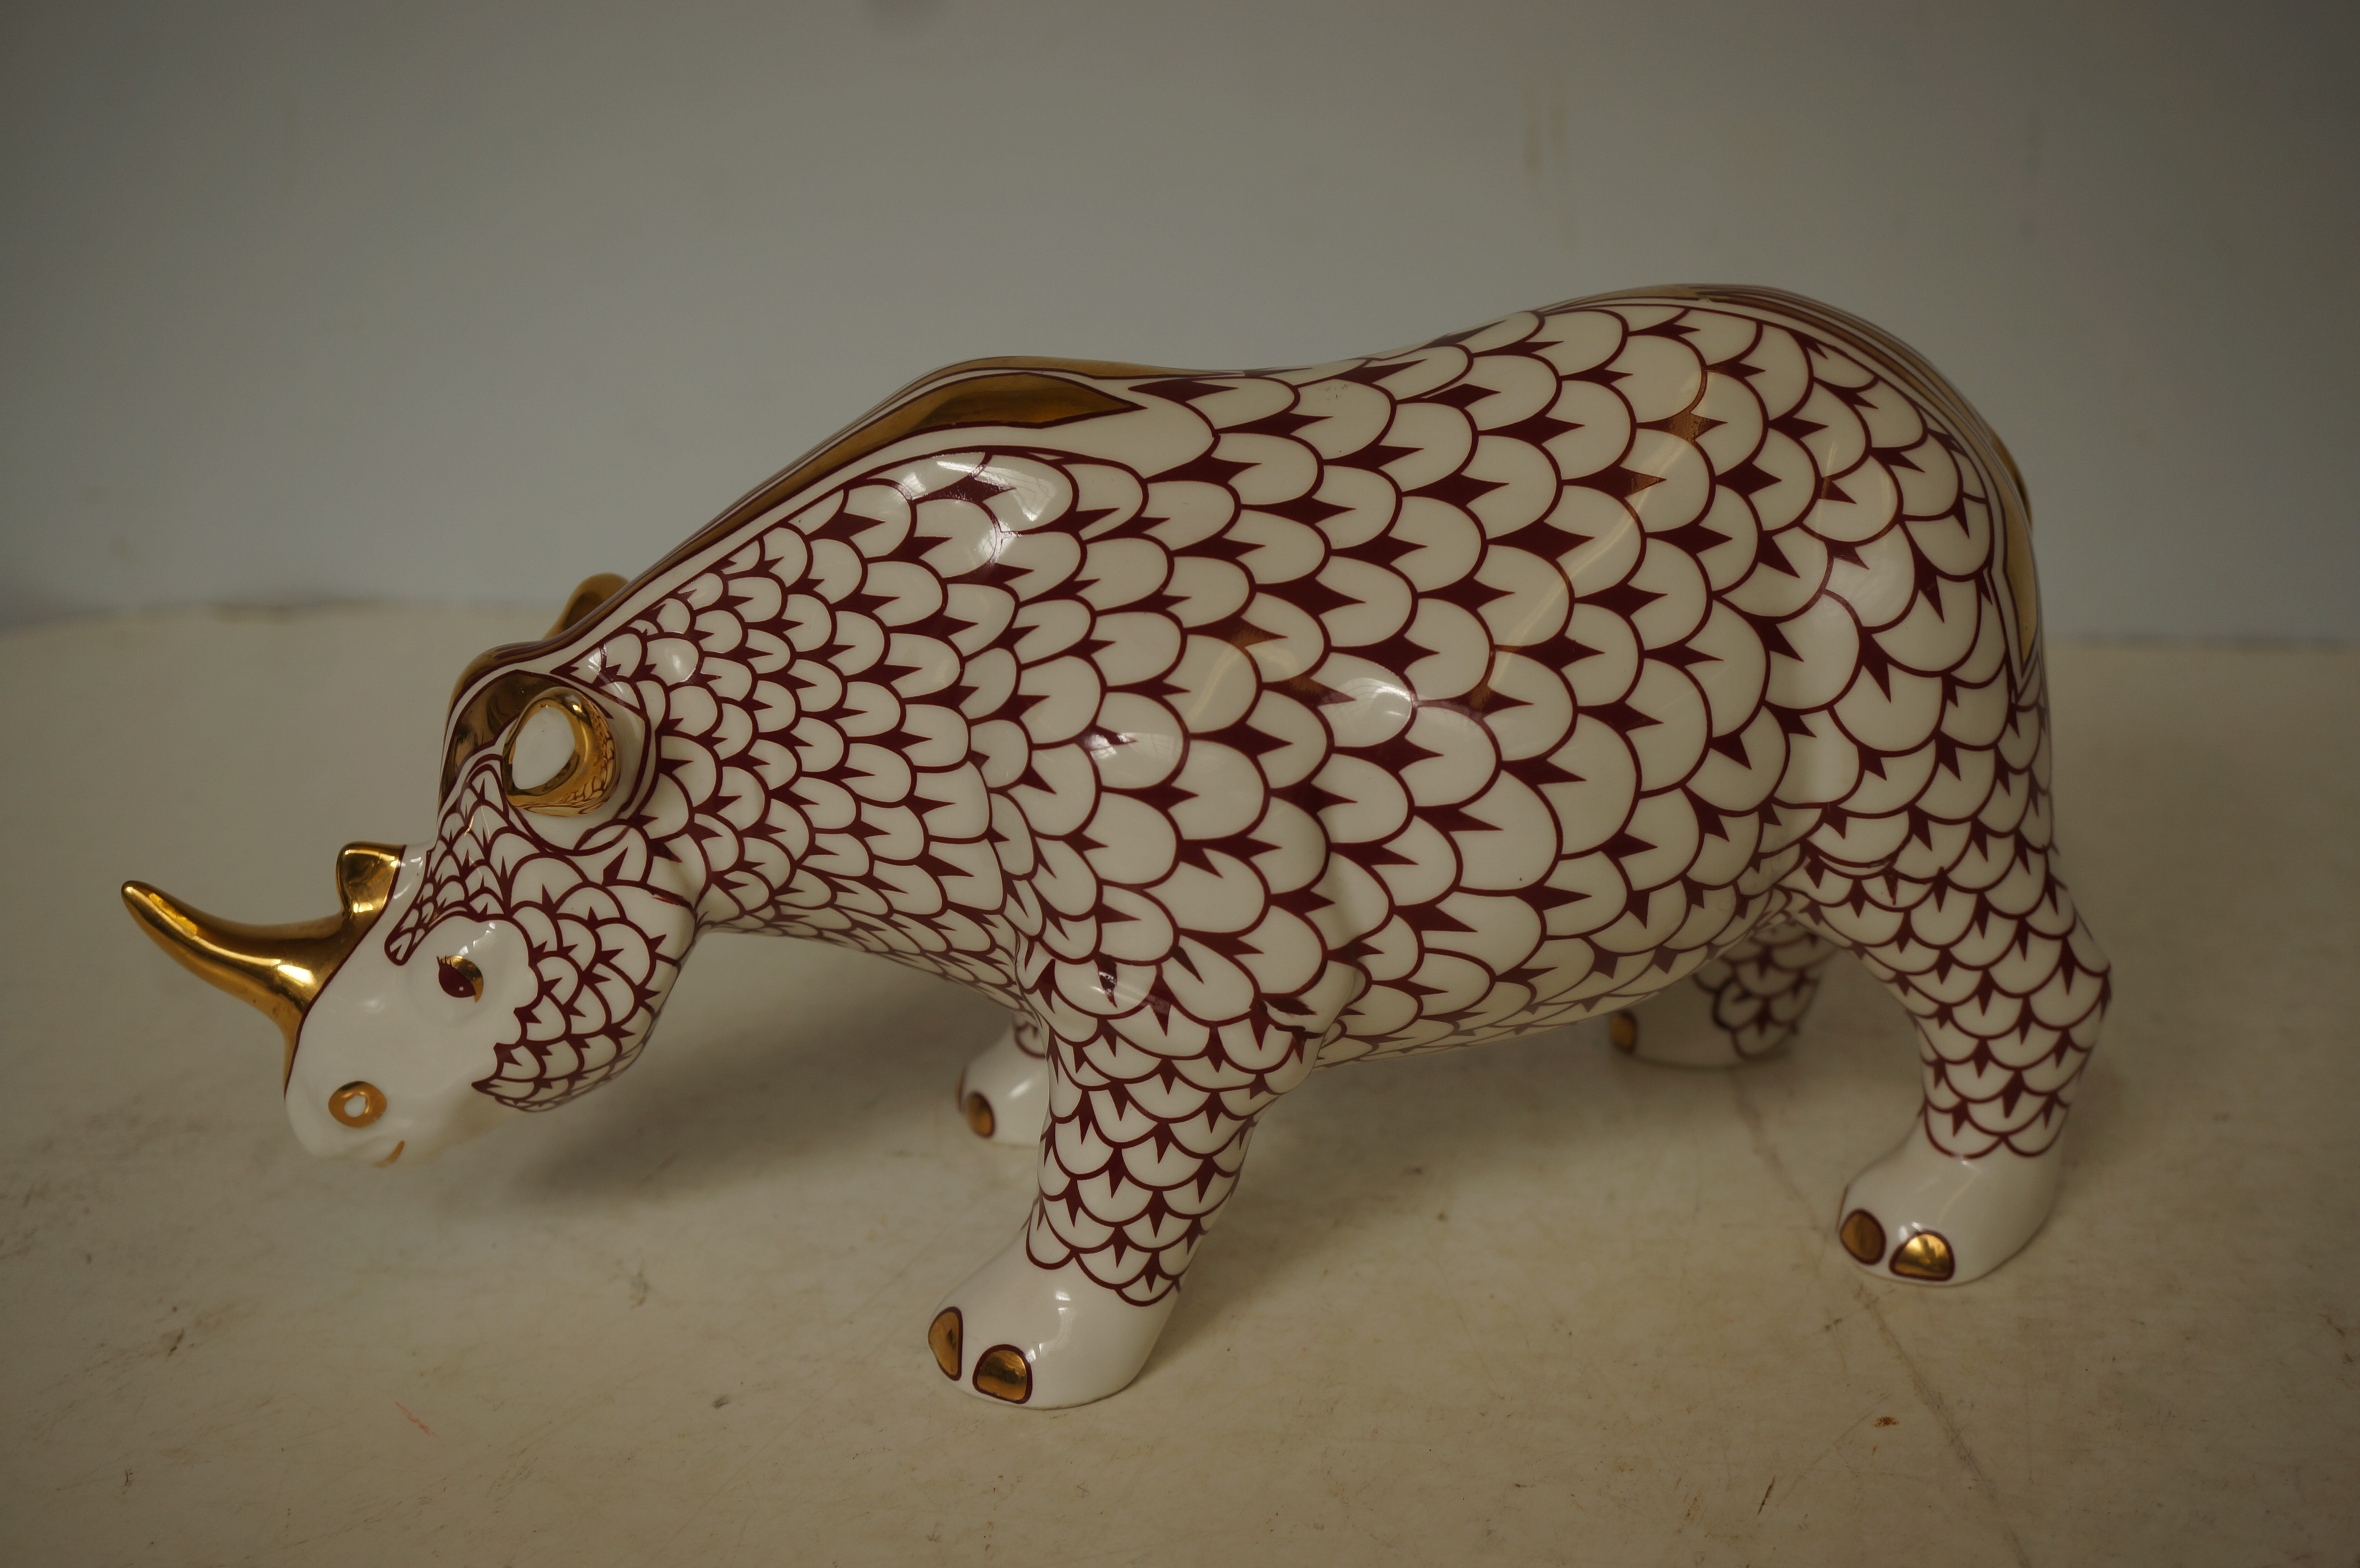 Herend style porcelain rhinoceros minor loss to ho